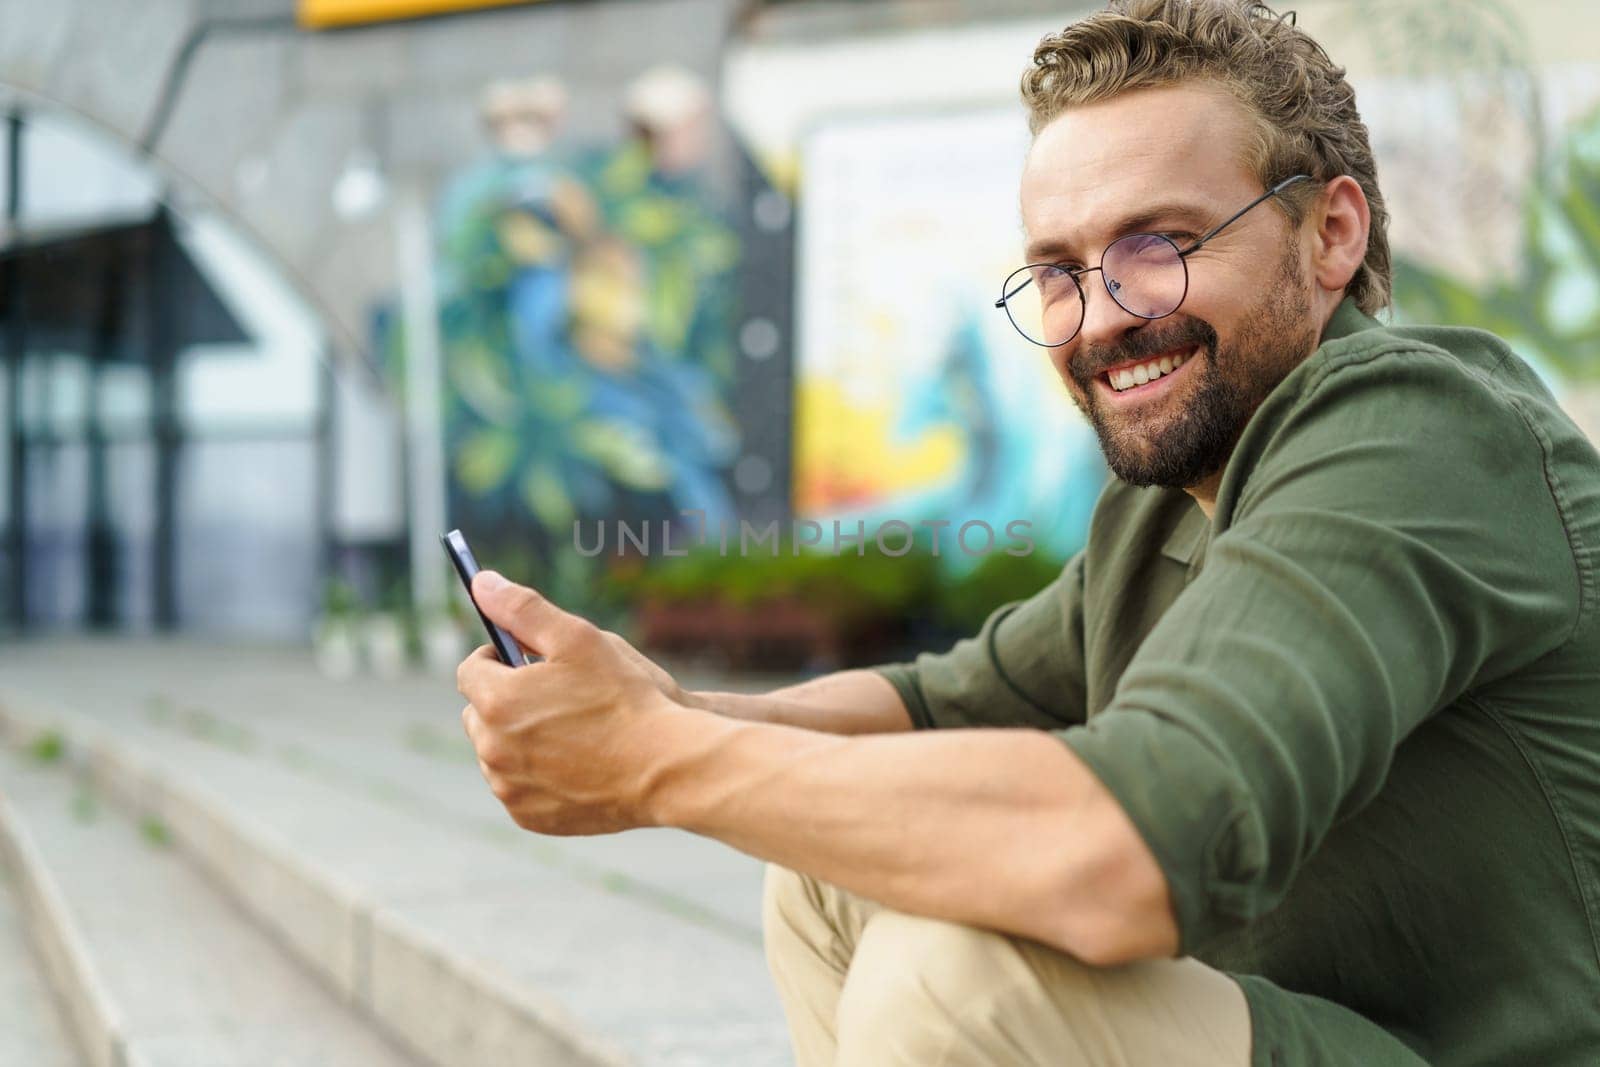 Man sitting on stone stairs on street, using pocket PC. With compact and portable device in hand, he effortlessly combines technology with surroundings. urban backdrop adds modern touch to scene. by LipikStockMedia